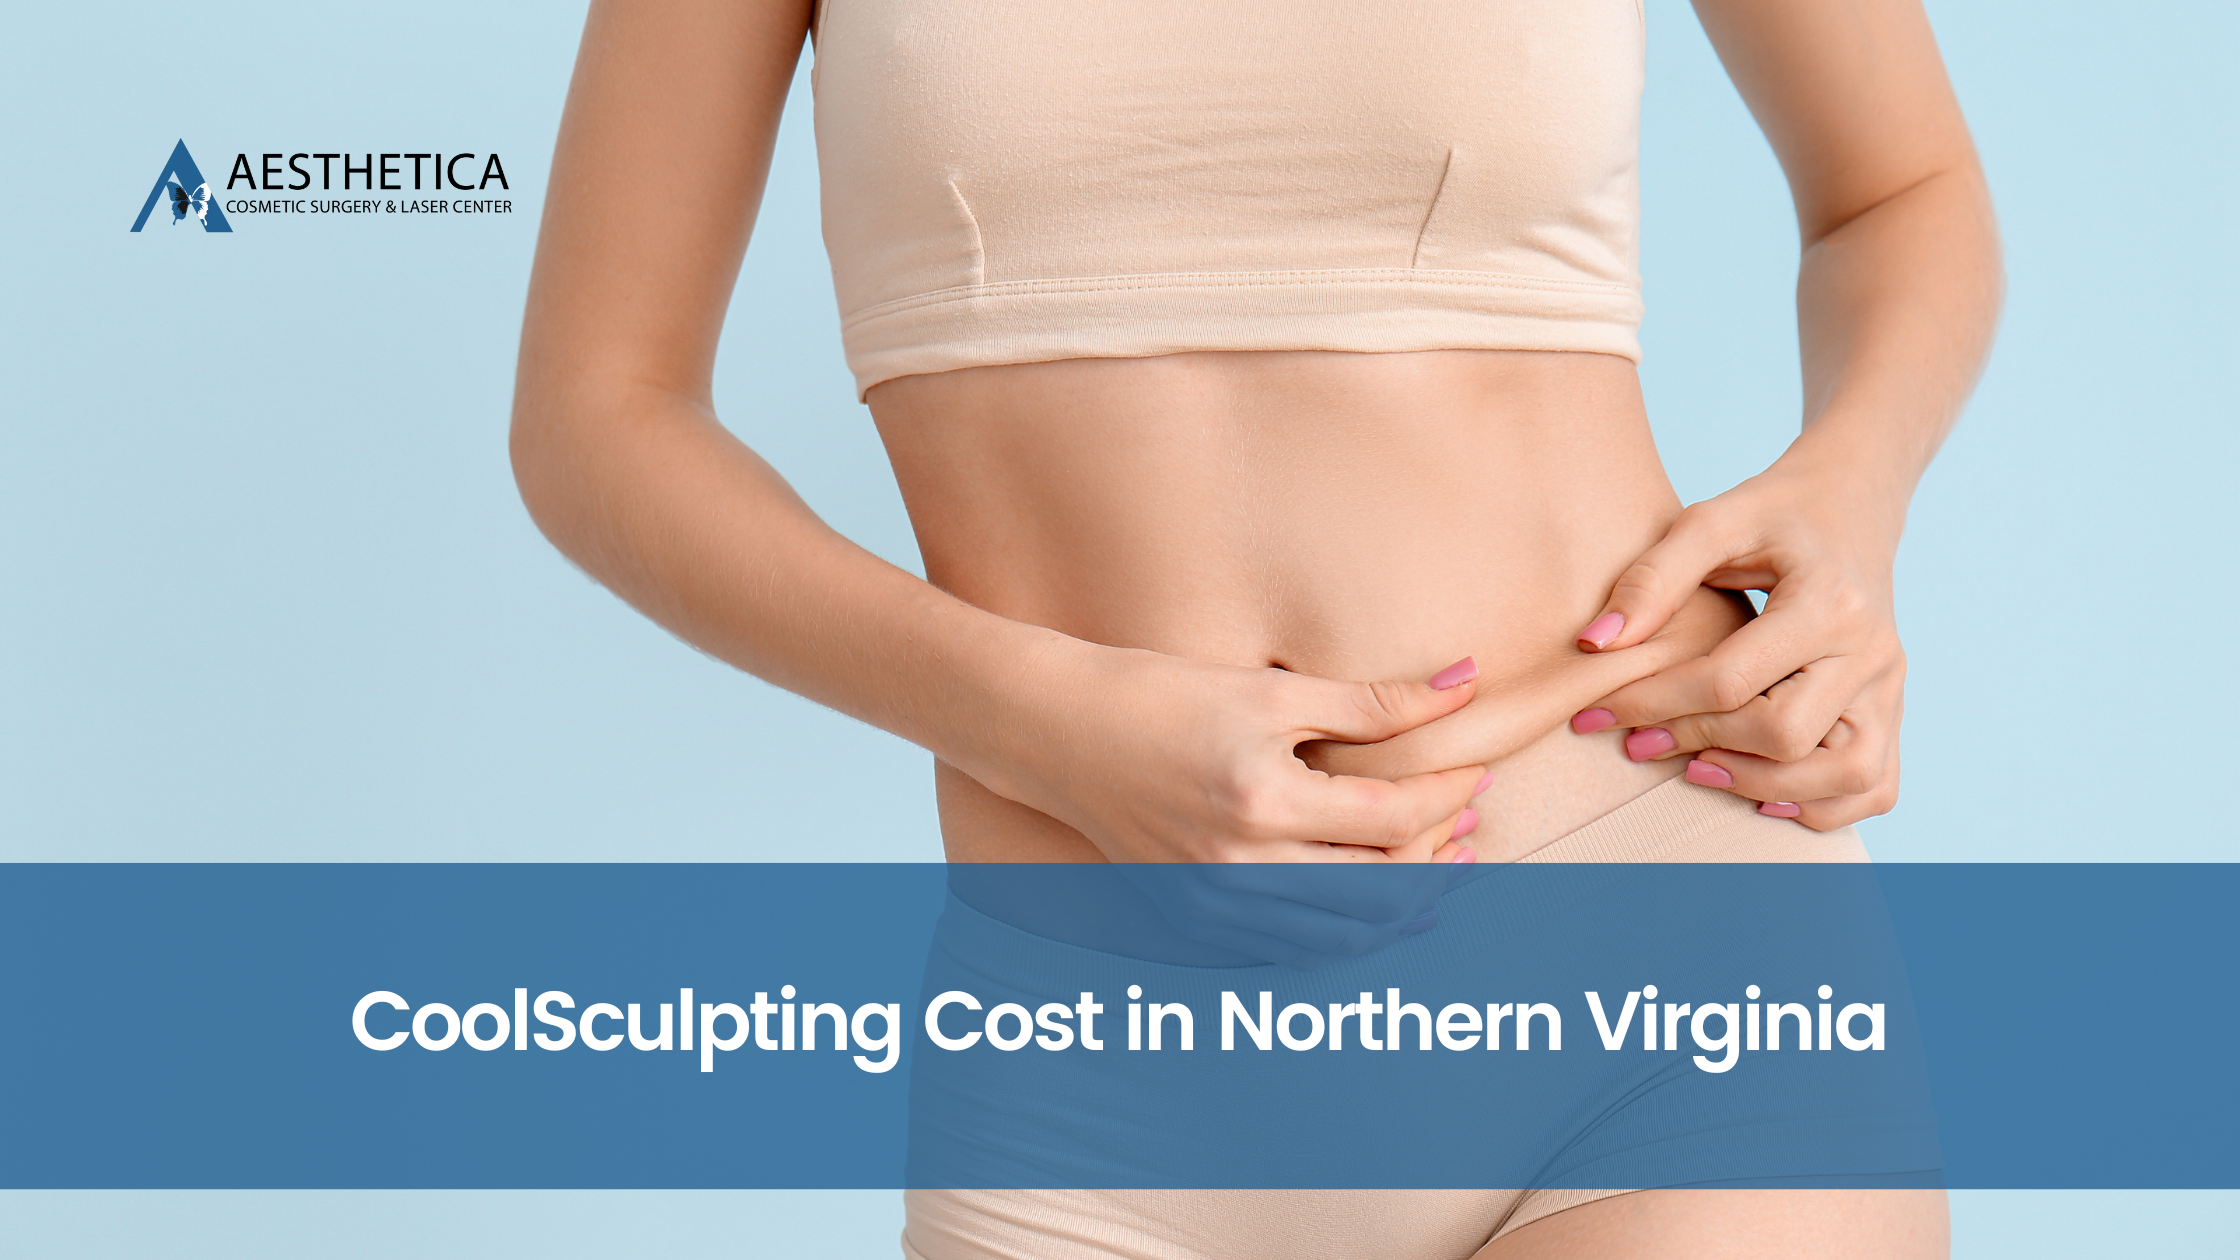 CoolSculpting Cost in Northern Virginia